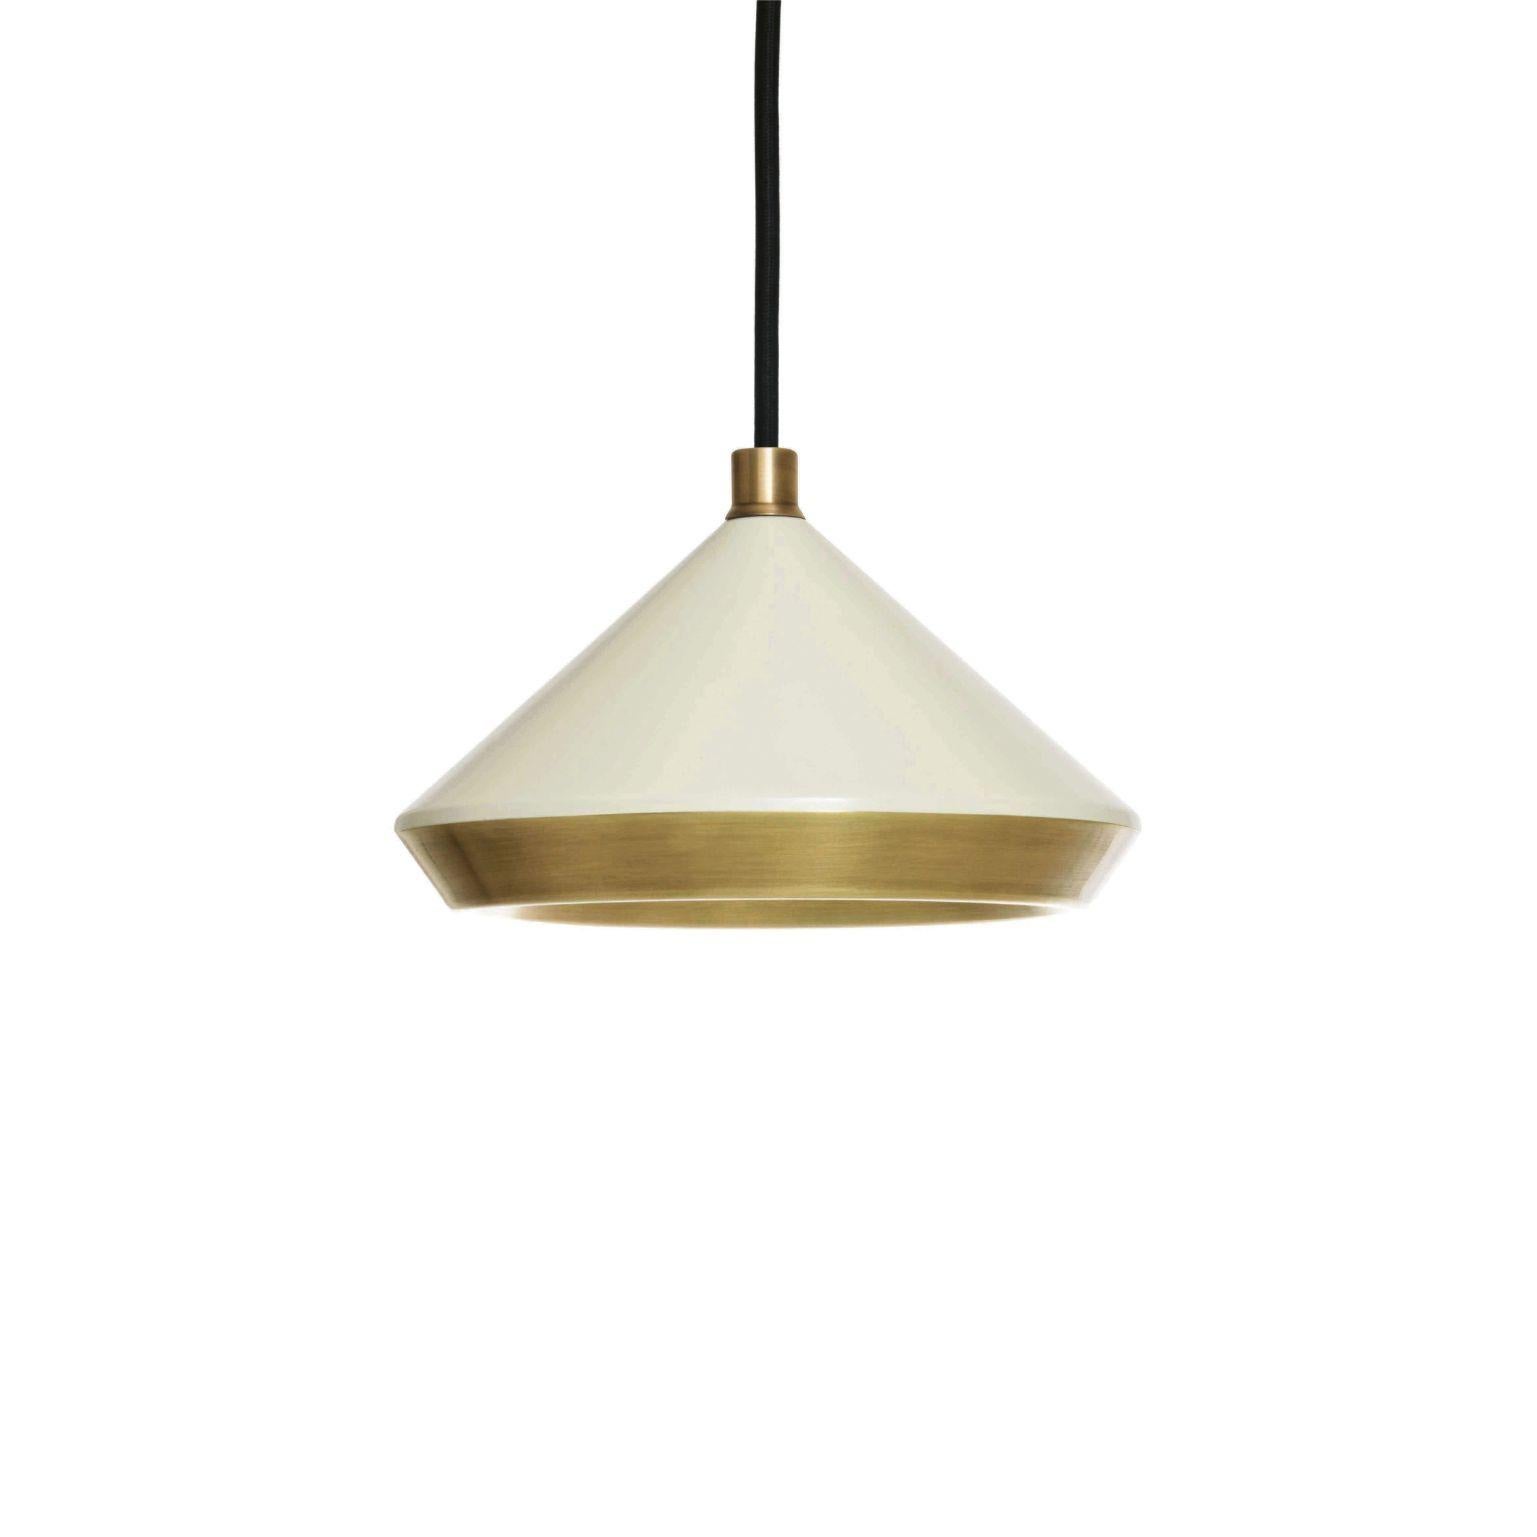 Shear Pendant Light - Brass - White by Bert Frank
Dimensions: 80-200 x 20 cm
Materials: Brass

When Adam Yeats and Robbie Llewellyn founded Bert Frank in 2013 it was a meeting of minds and the start of a collaborative creative partnership with